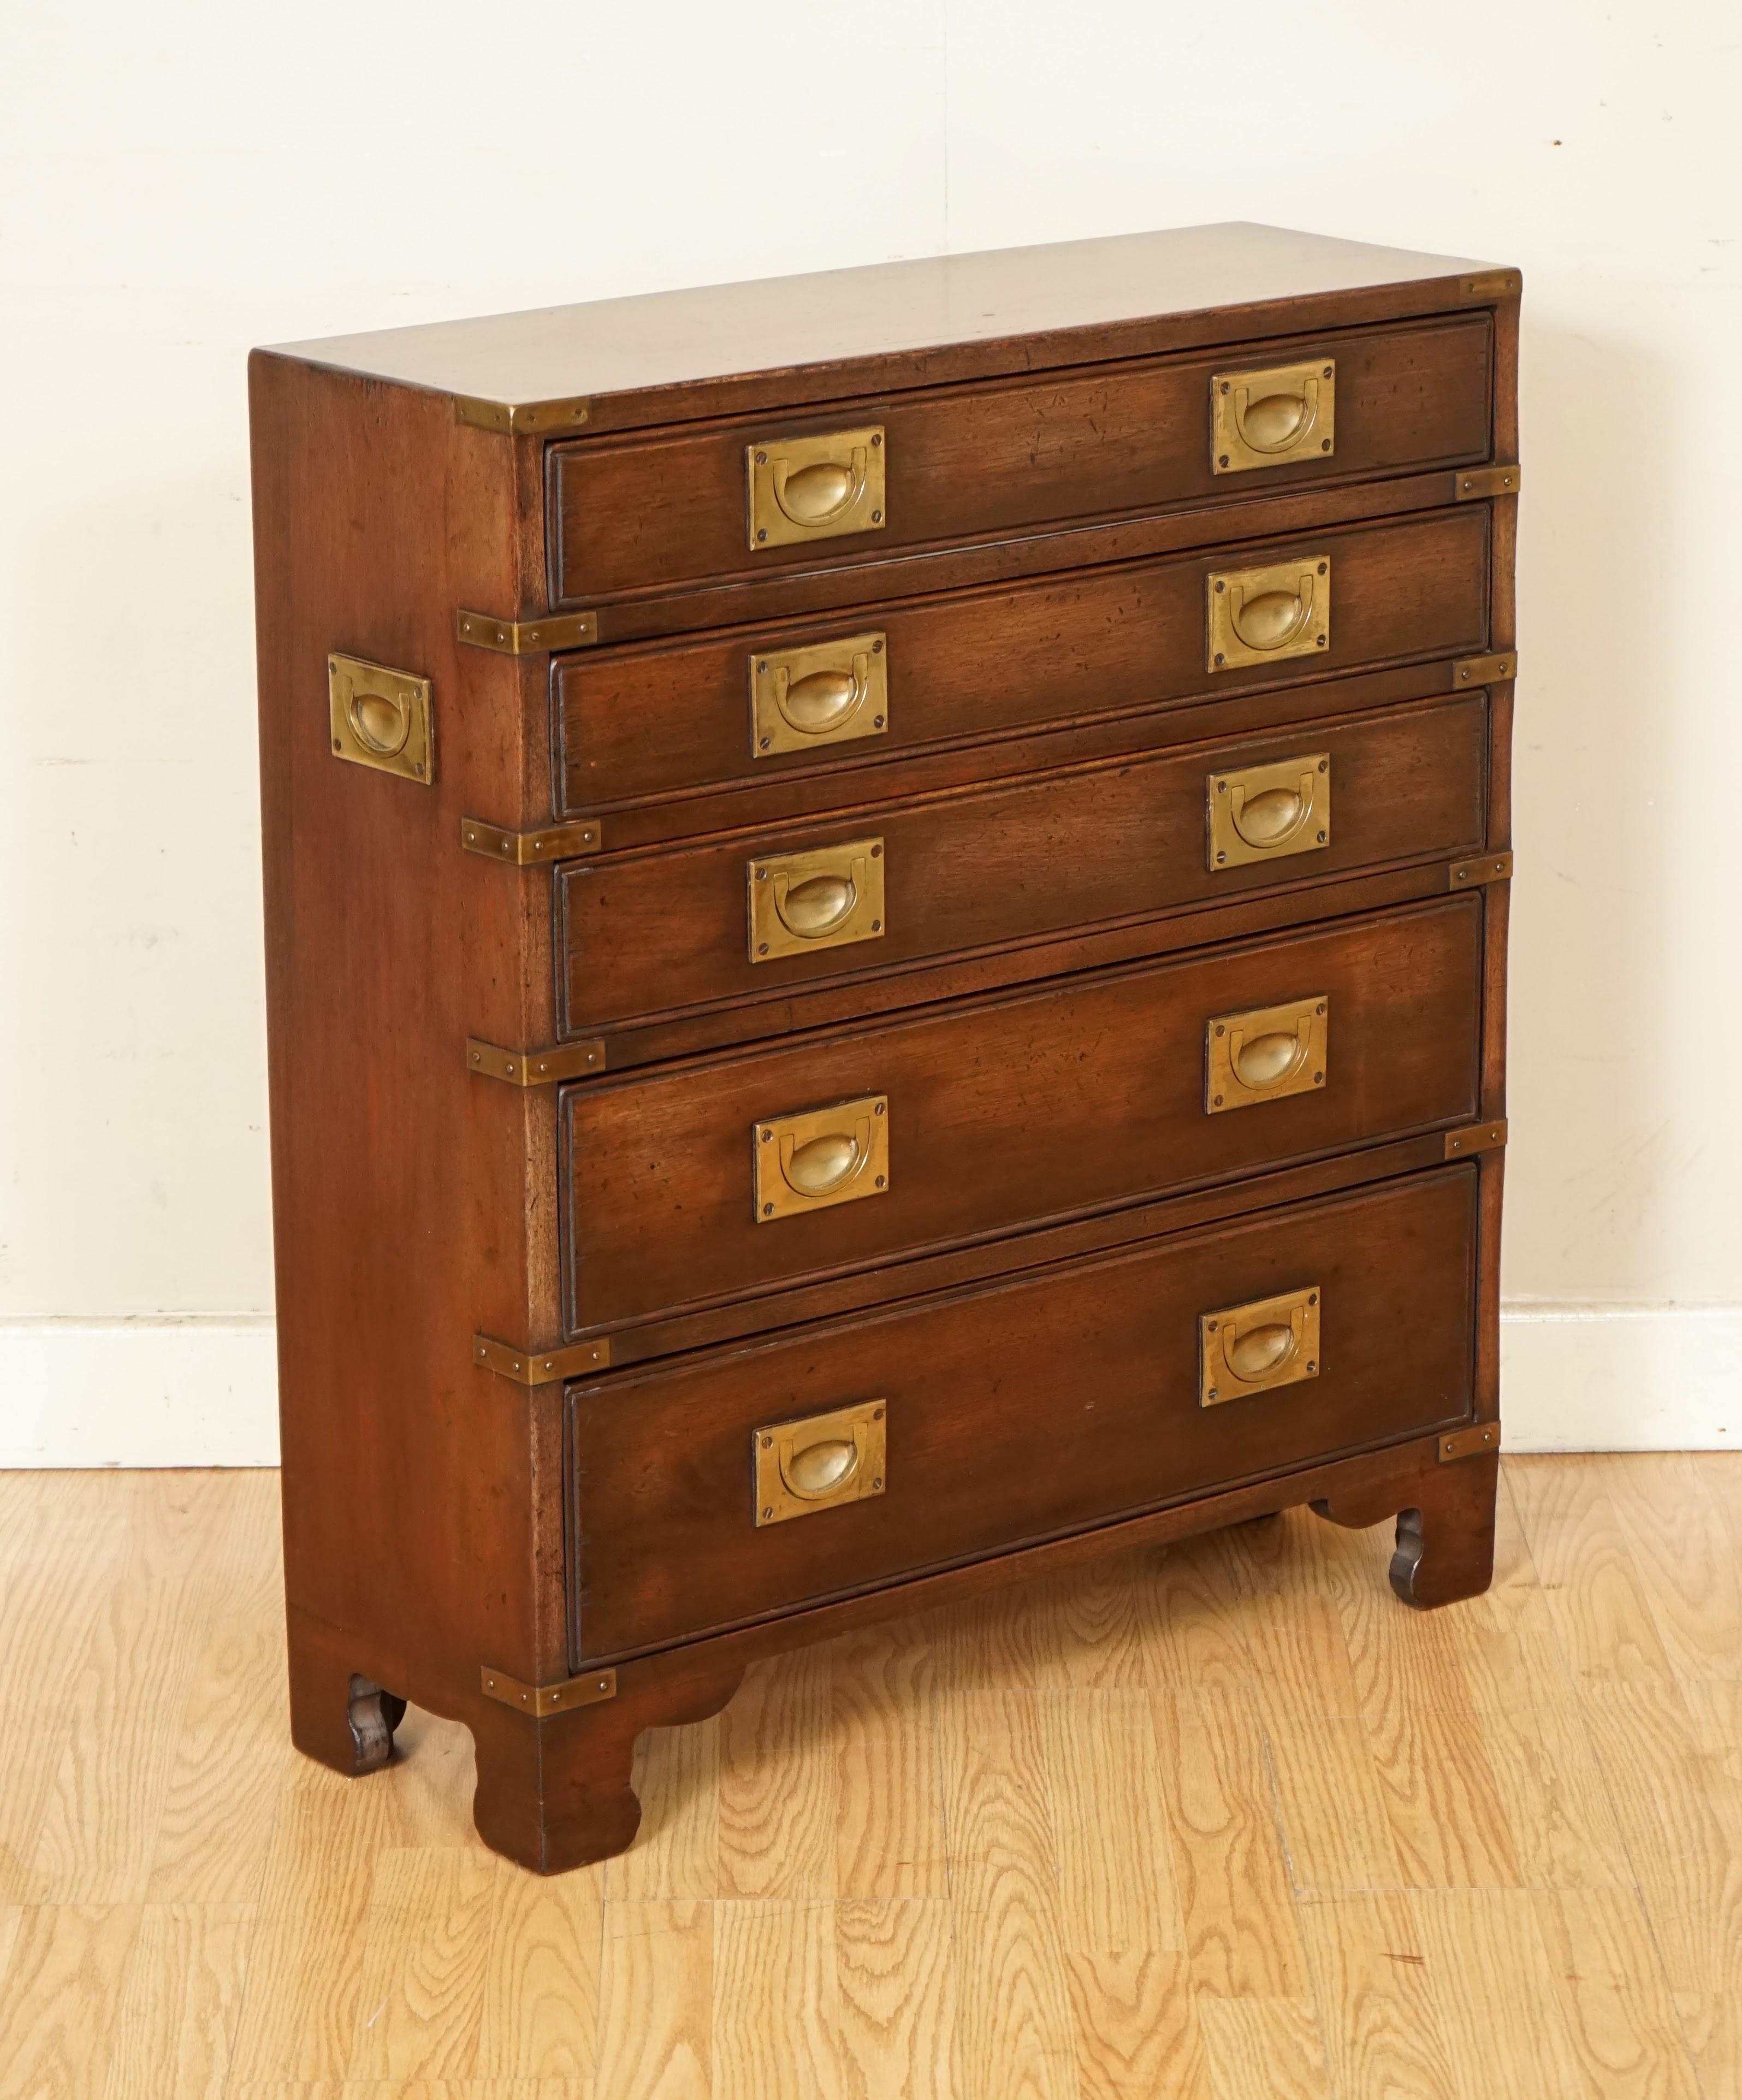 We are so excited to present to you this Outstanding Harrods Kennedy Military Campaign Chest of Drawers. 

A very well made and solid chest, with brass fixtures on all the edges and handles. 

We have lightly restored this by giving it a hand